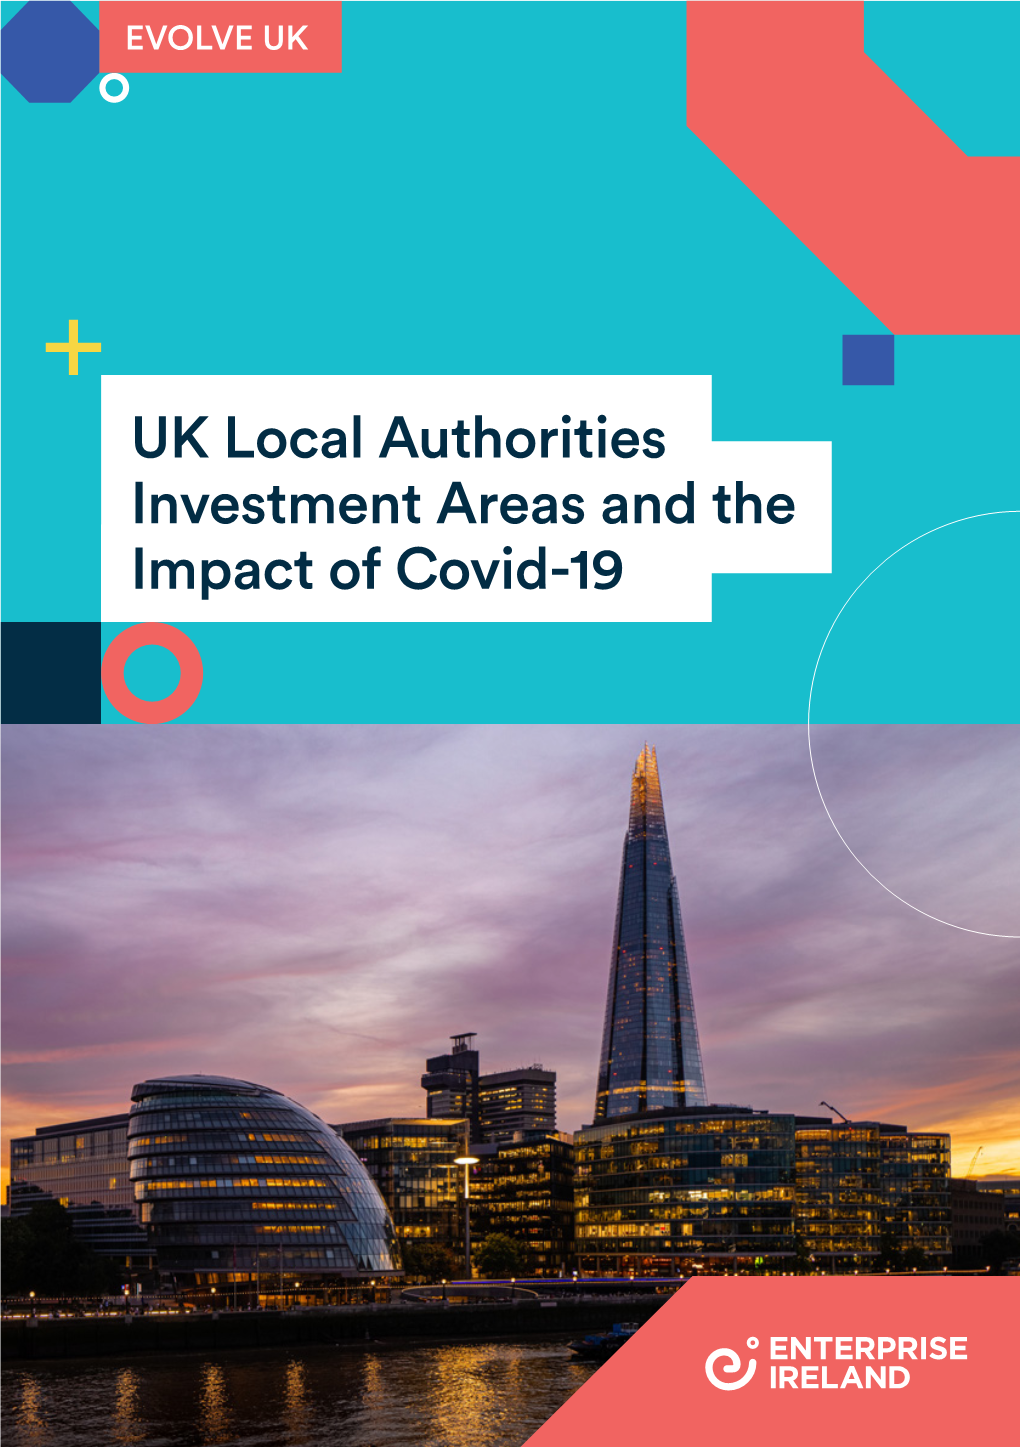 UK Local Authorities Investment Areas and the Impact of Covid-19 Contents